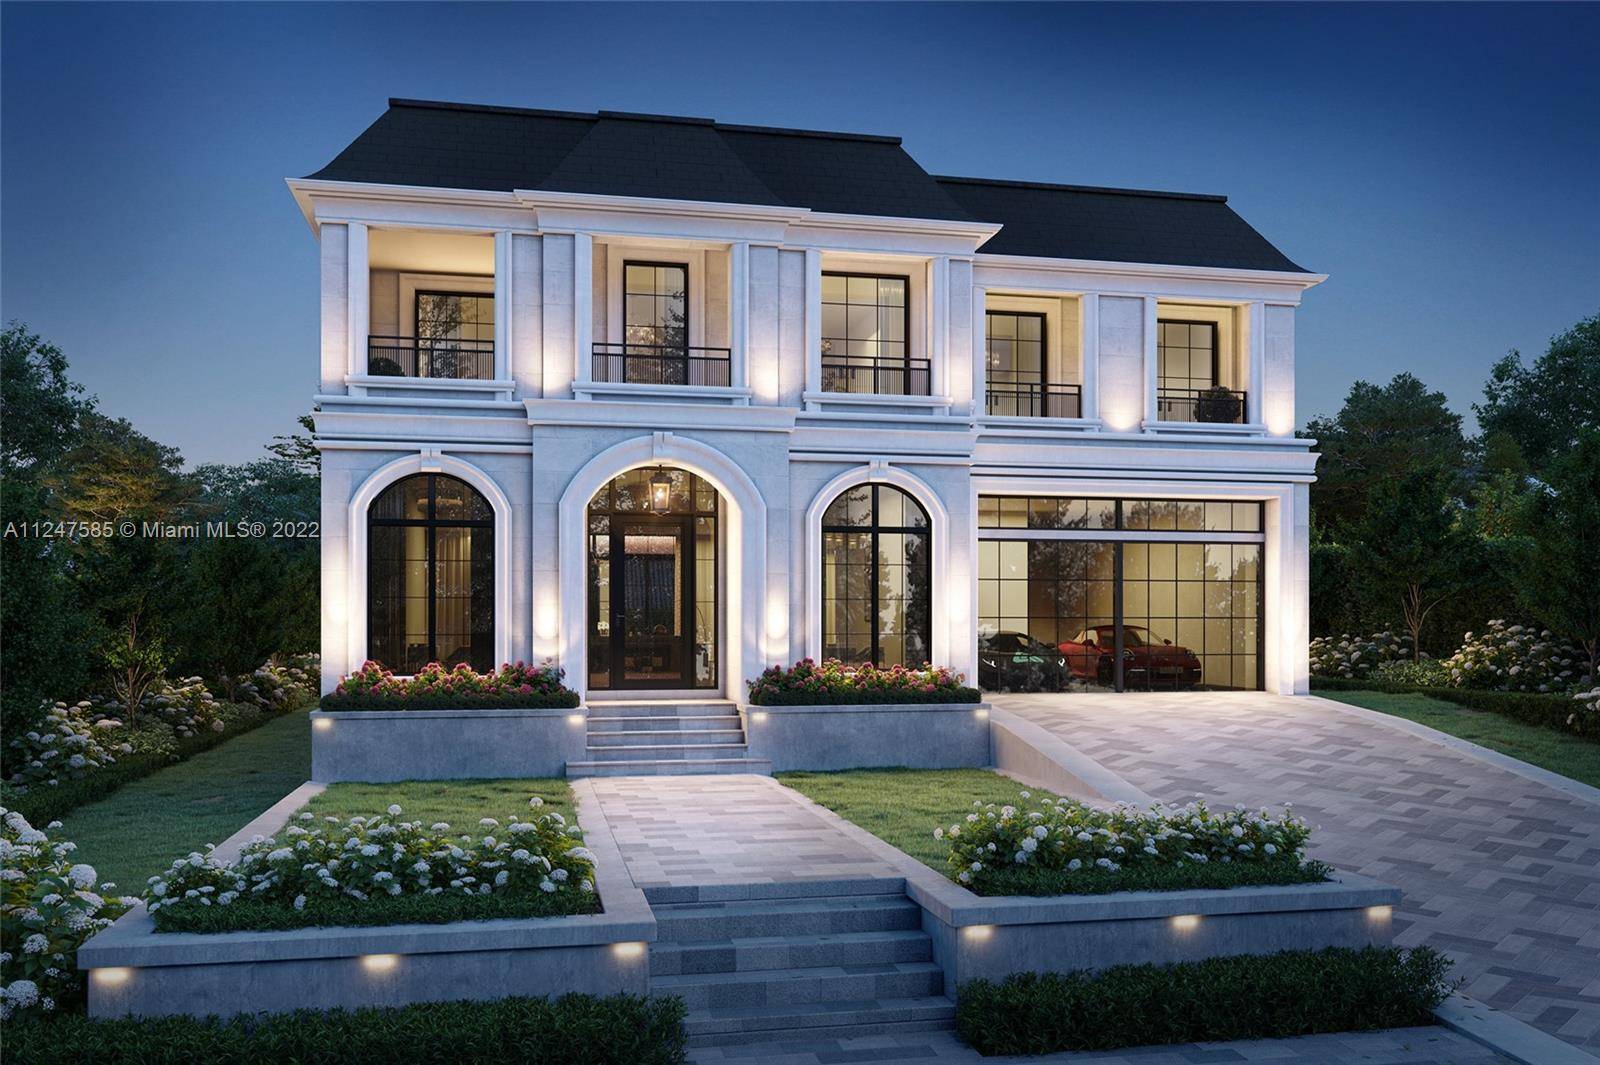 A timeless design, Reflection Manor presents as a sprawling new construction French transitional chateau in the coveted estate neighborhood of Eastern Miami Shores.